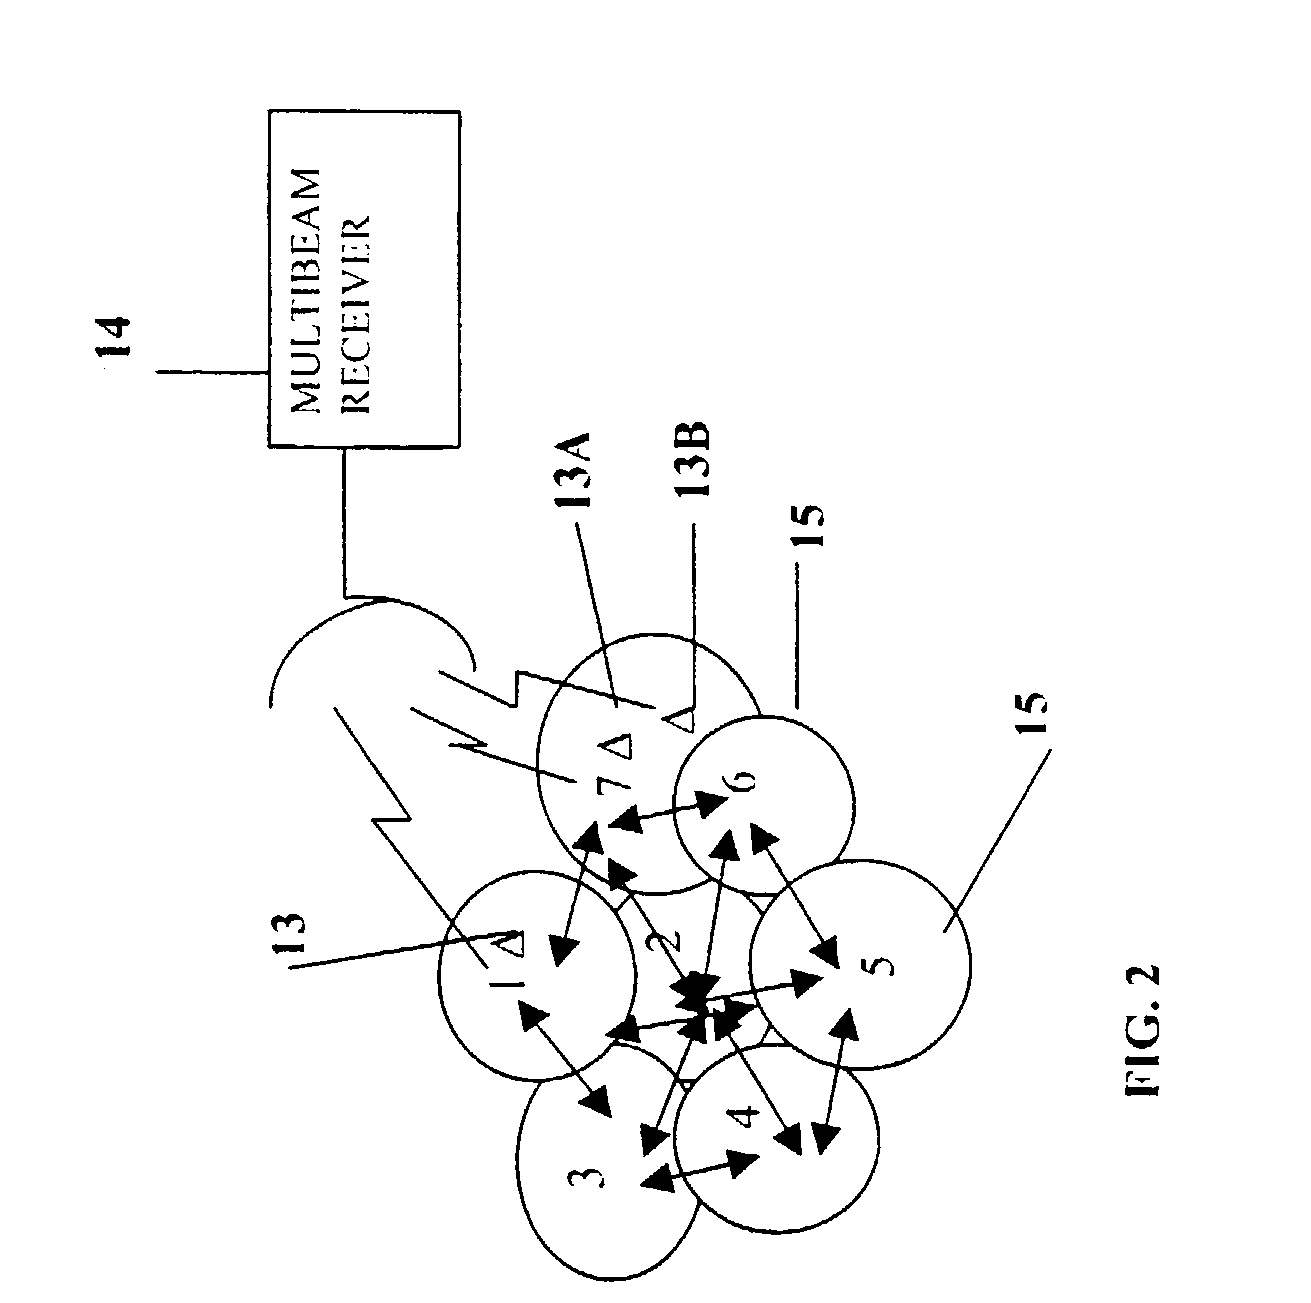 Multiple access system and method for multibeam digital radio systems